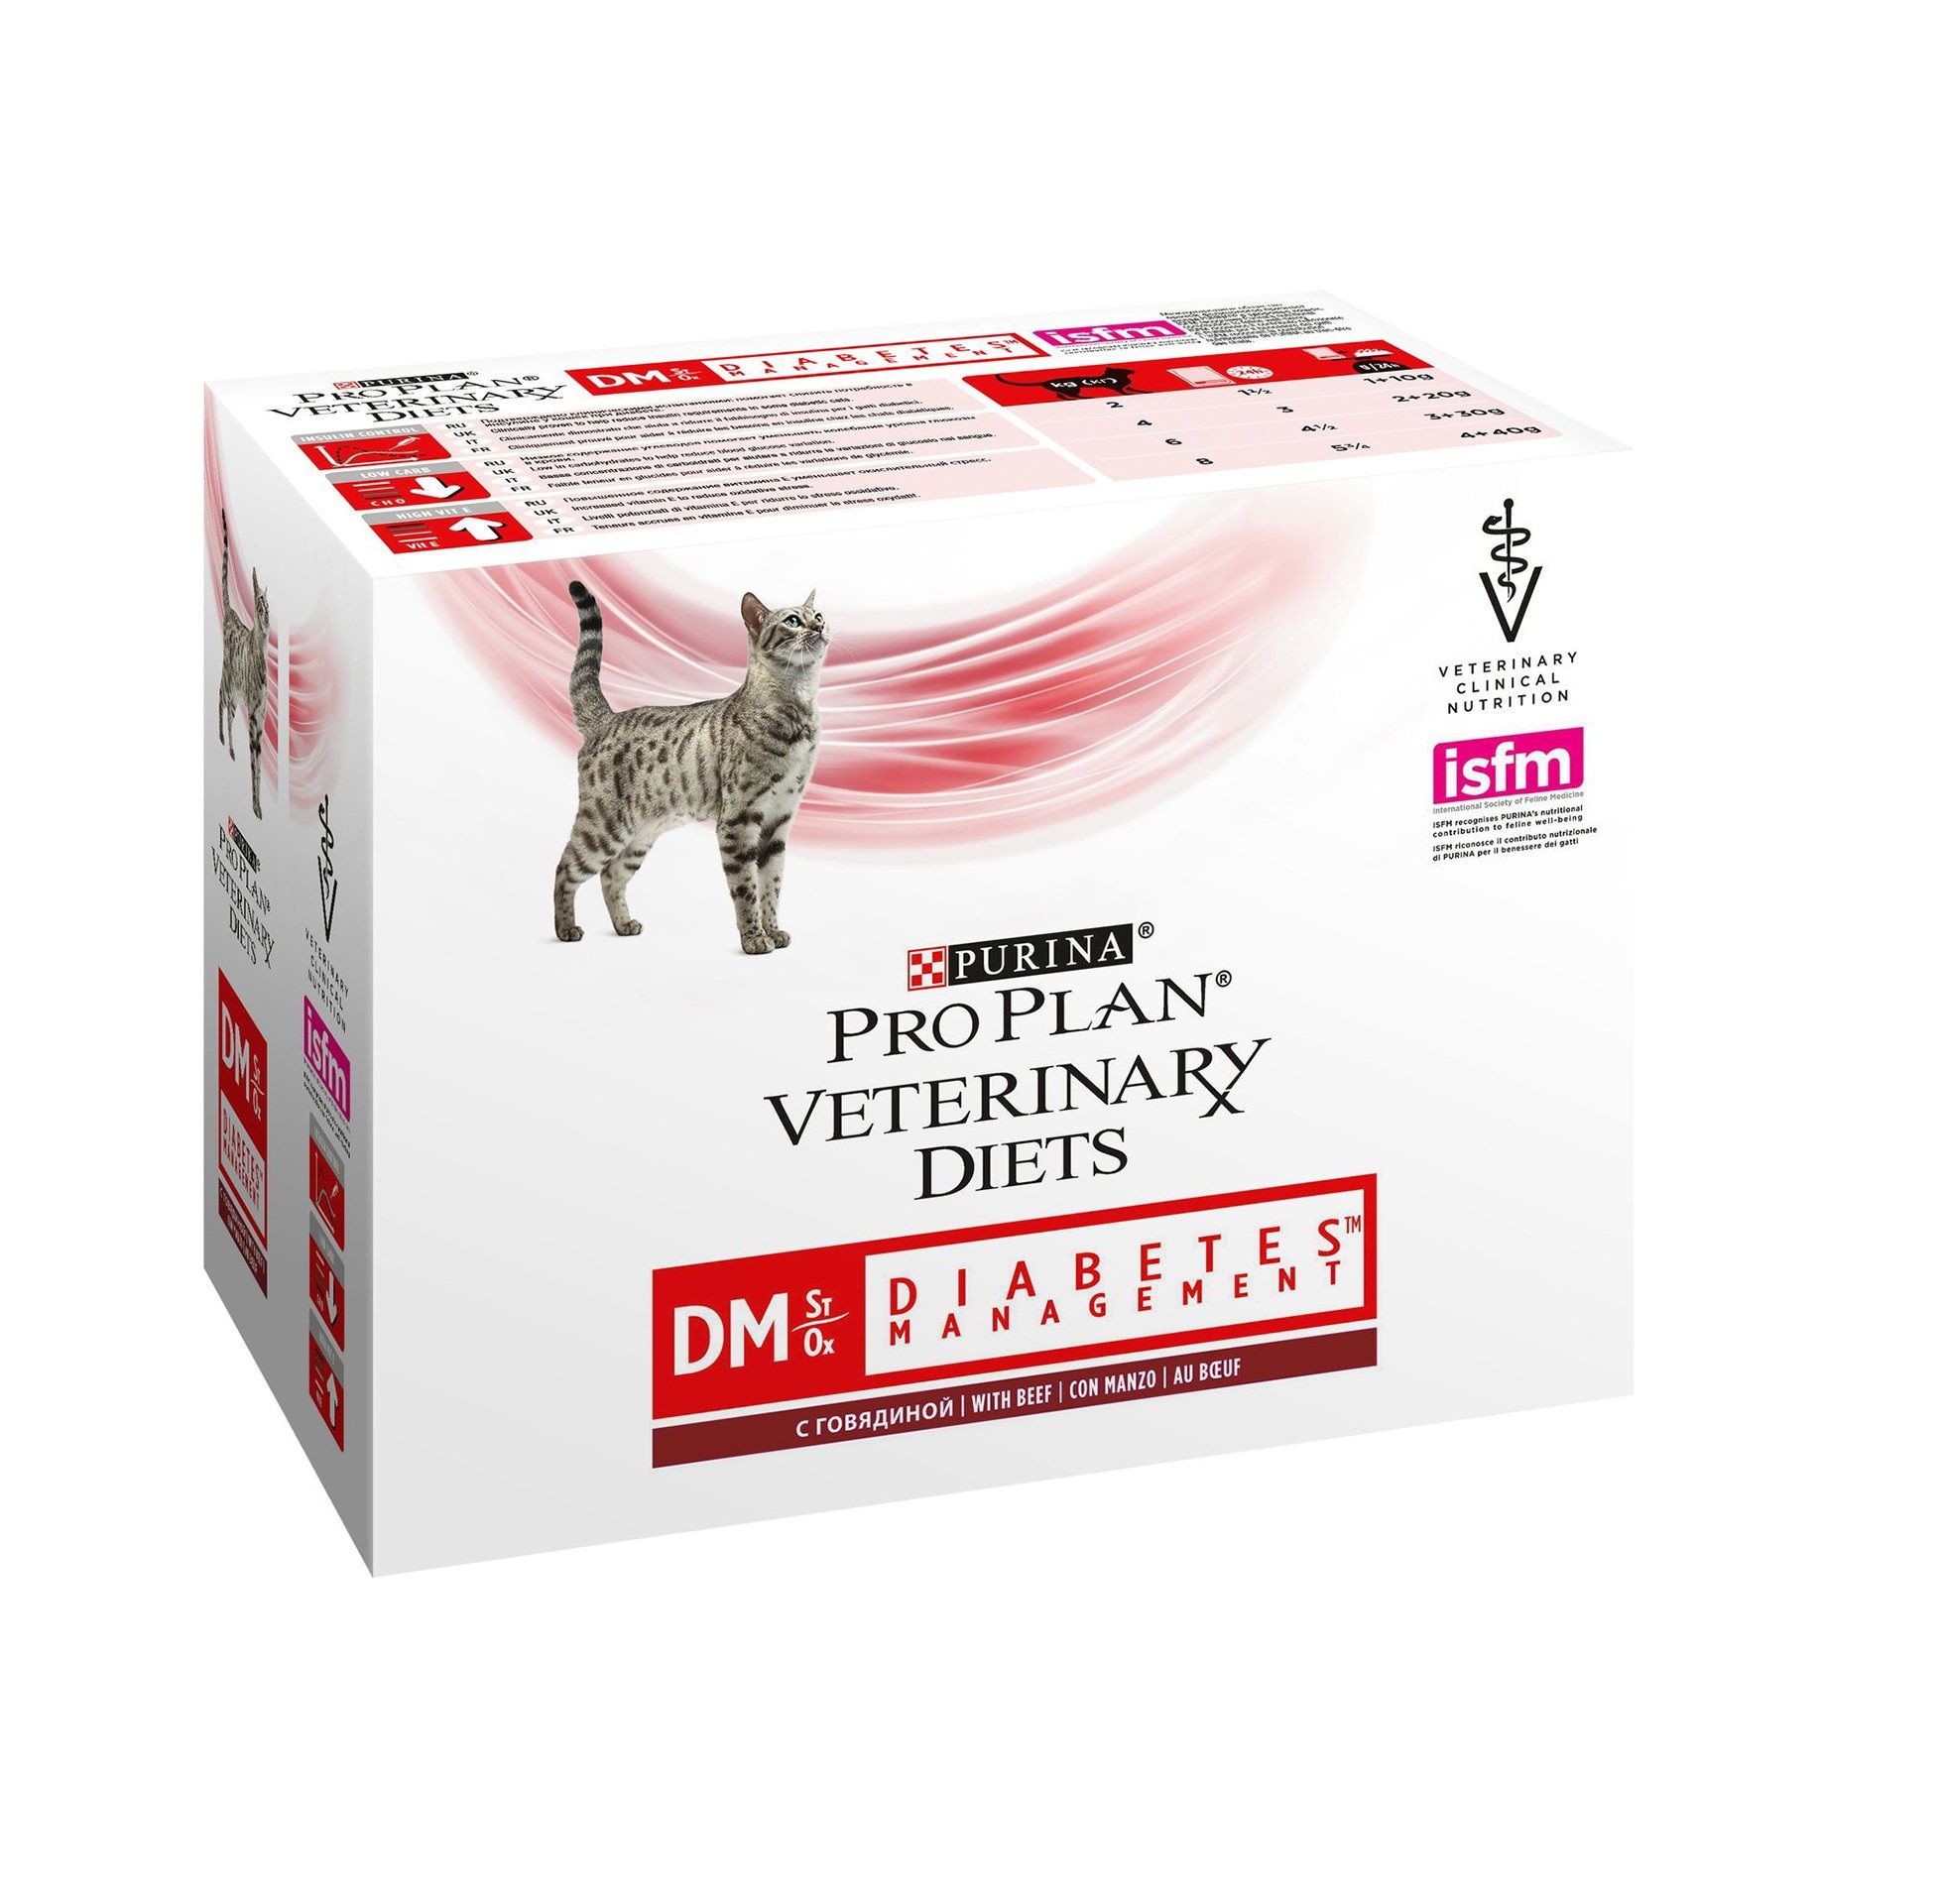 Pro plan veterinary diets цена. Purina Pro Plan Veterinary Diets для кошек влажный NF. Renal Purina Pro Plan для кошек Veterinary Diets. Корм для кошек Pro Plan Veterinary Diets (0.085 кг) 1 шт. Feline DM Diabetes Management Beef Pouch. Purina Pro Plan Veterinary Diets консервы.